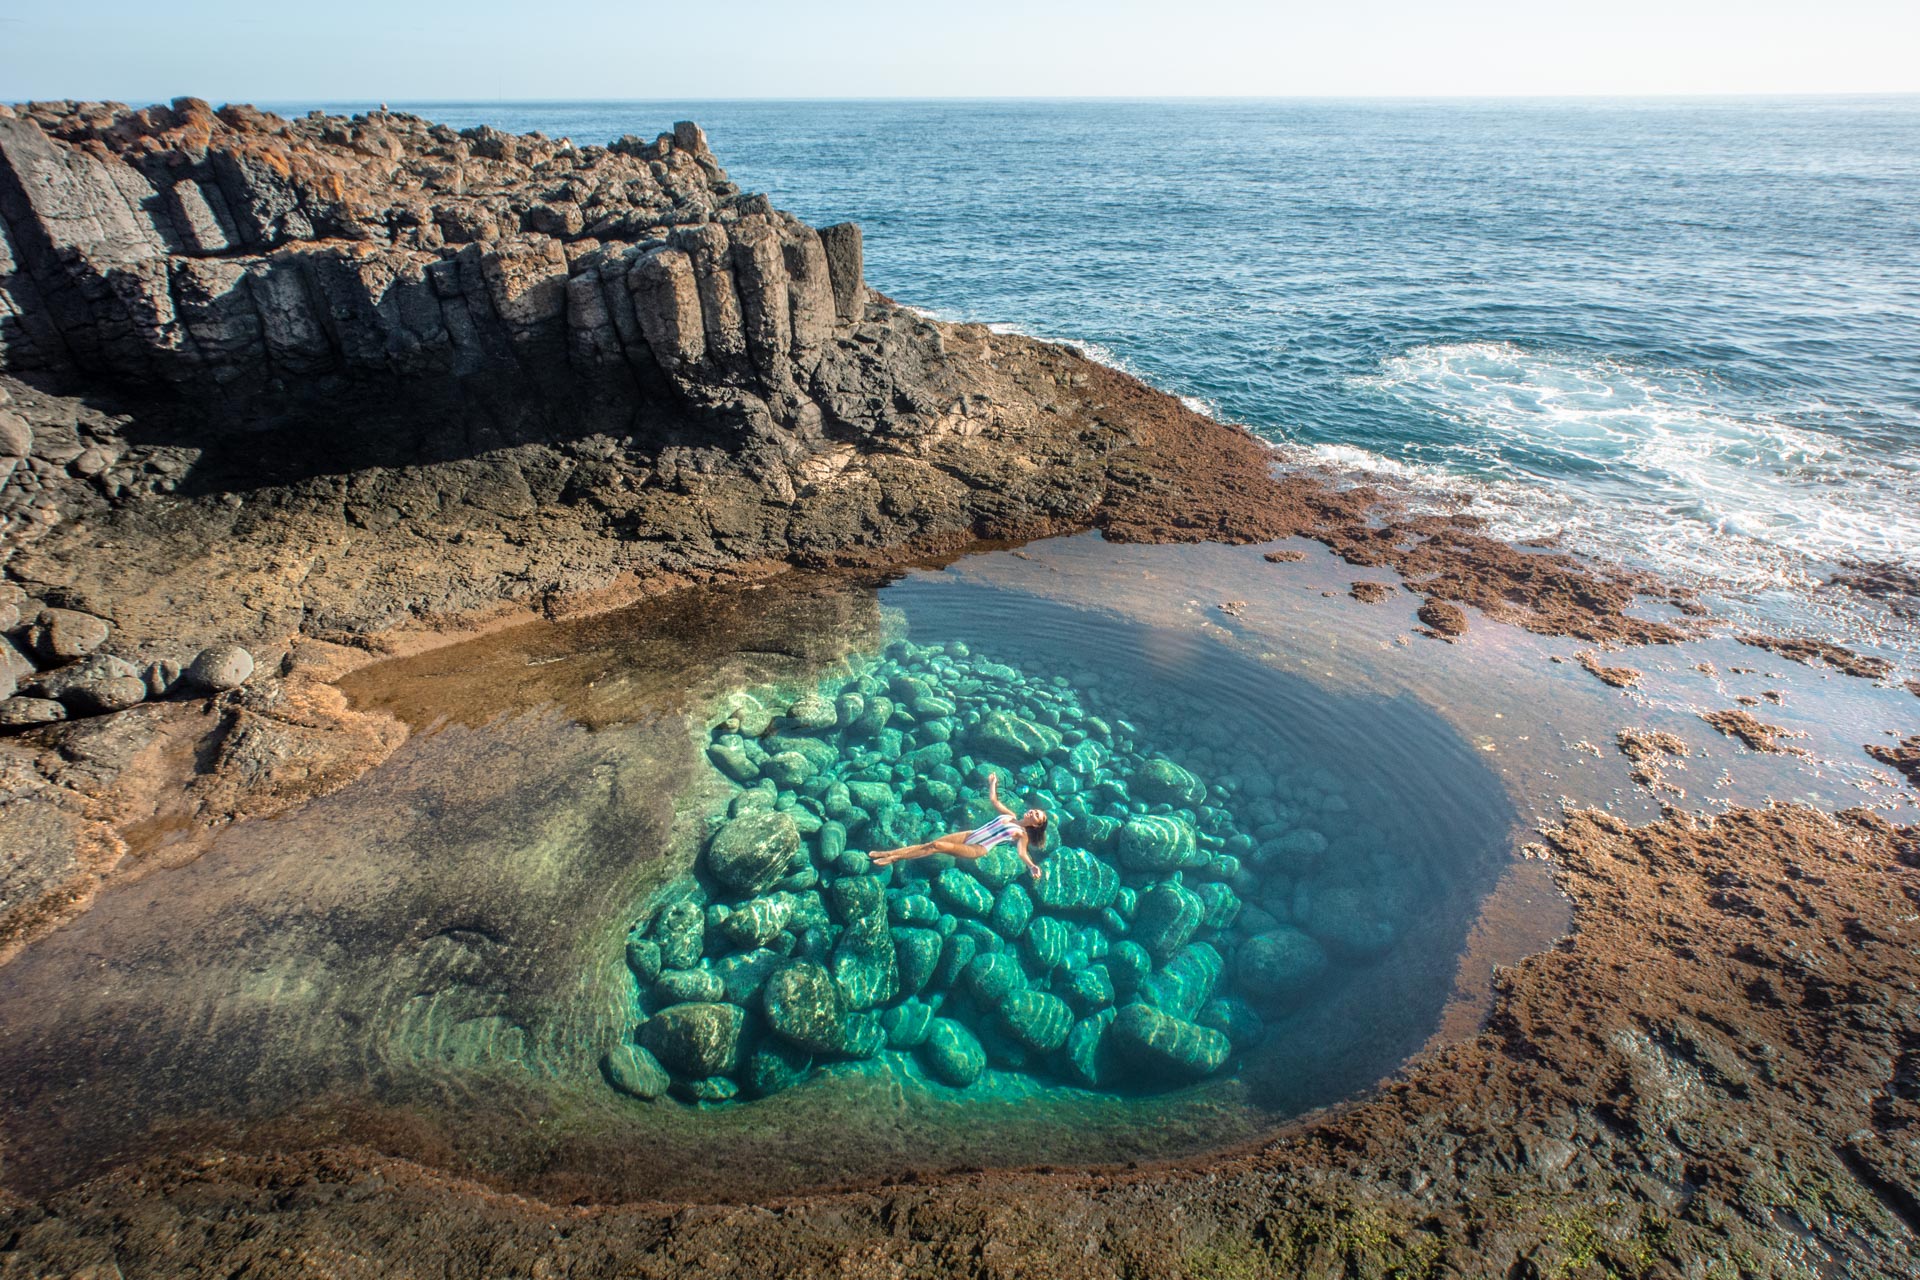 How To Find the Natural Rock Pool in Fuerteventura: All You Need To Know